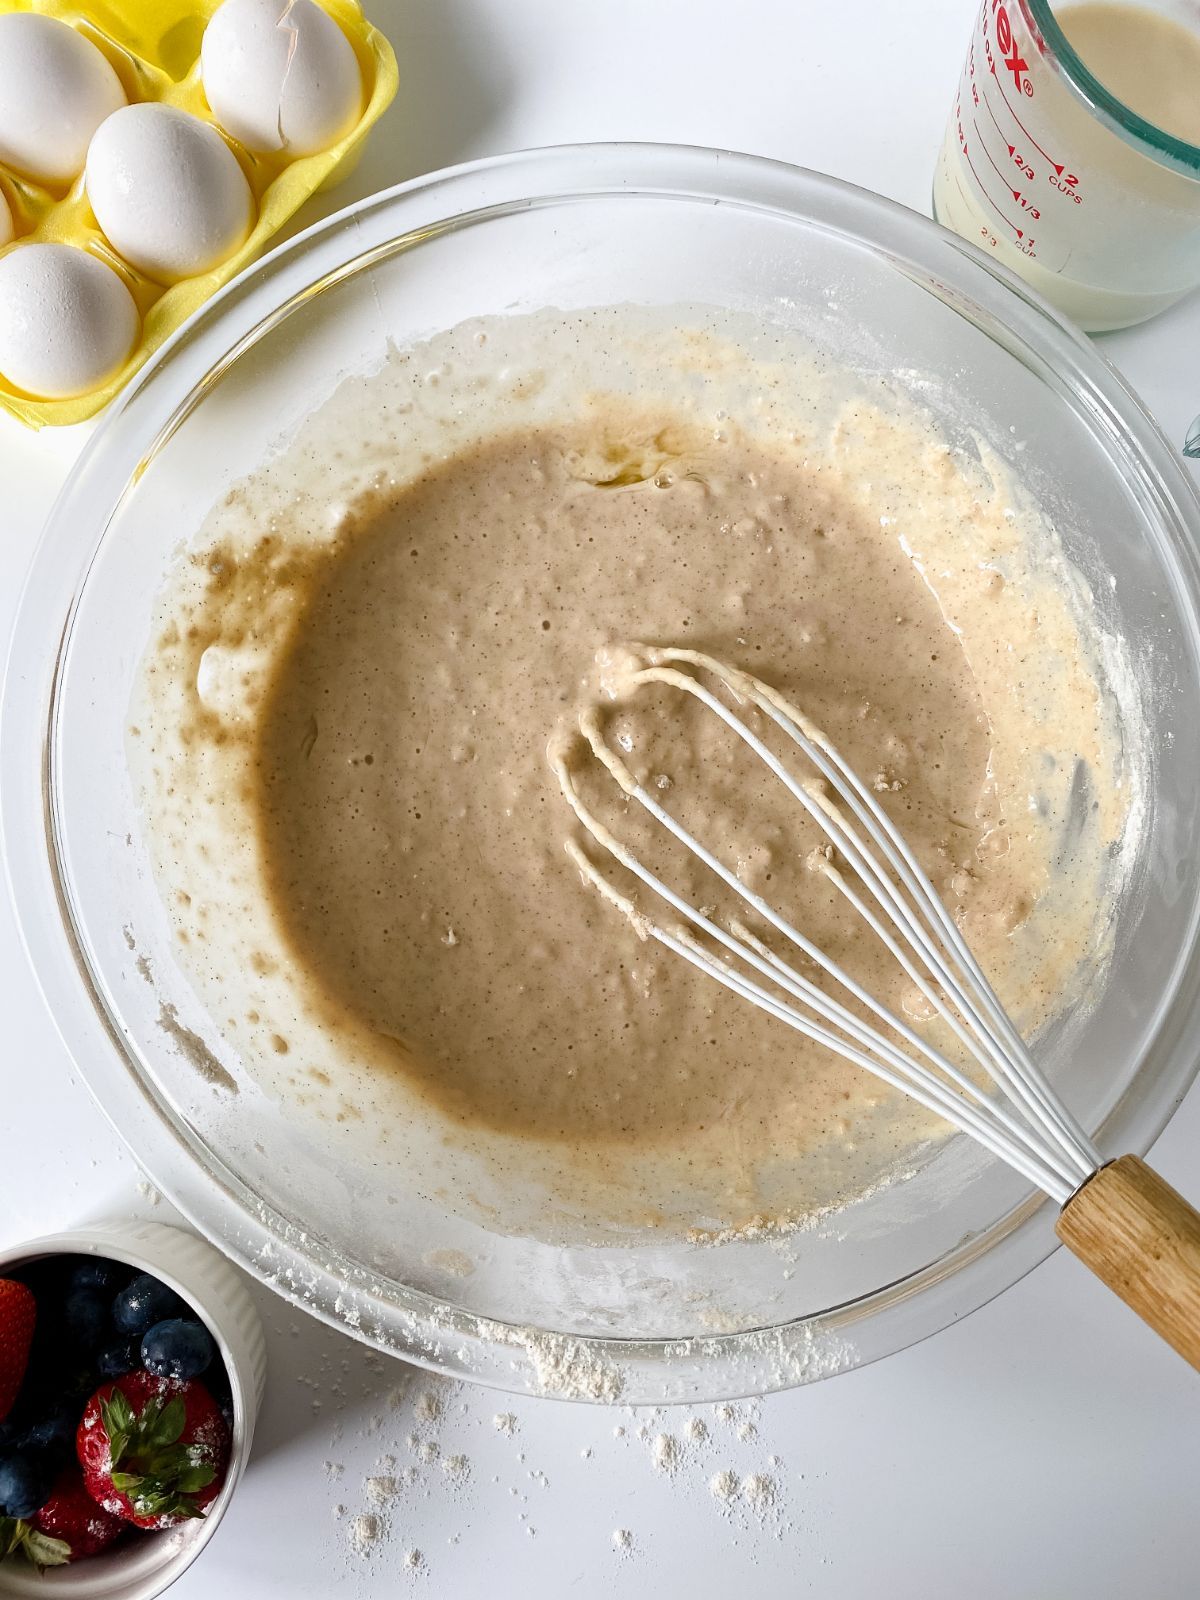 whisk in glass bowl of waffle batter